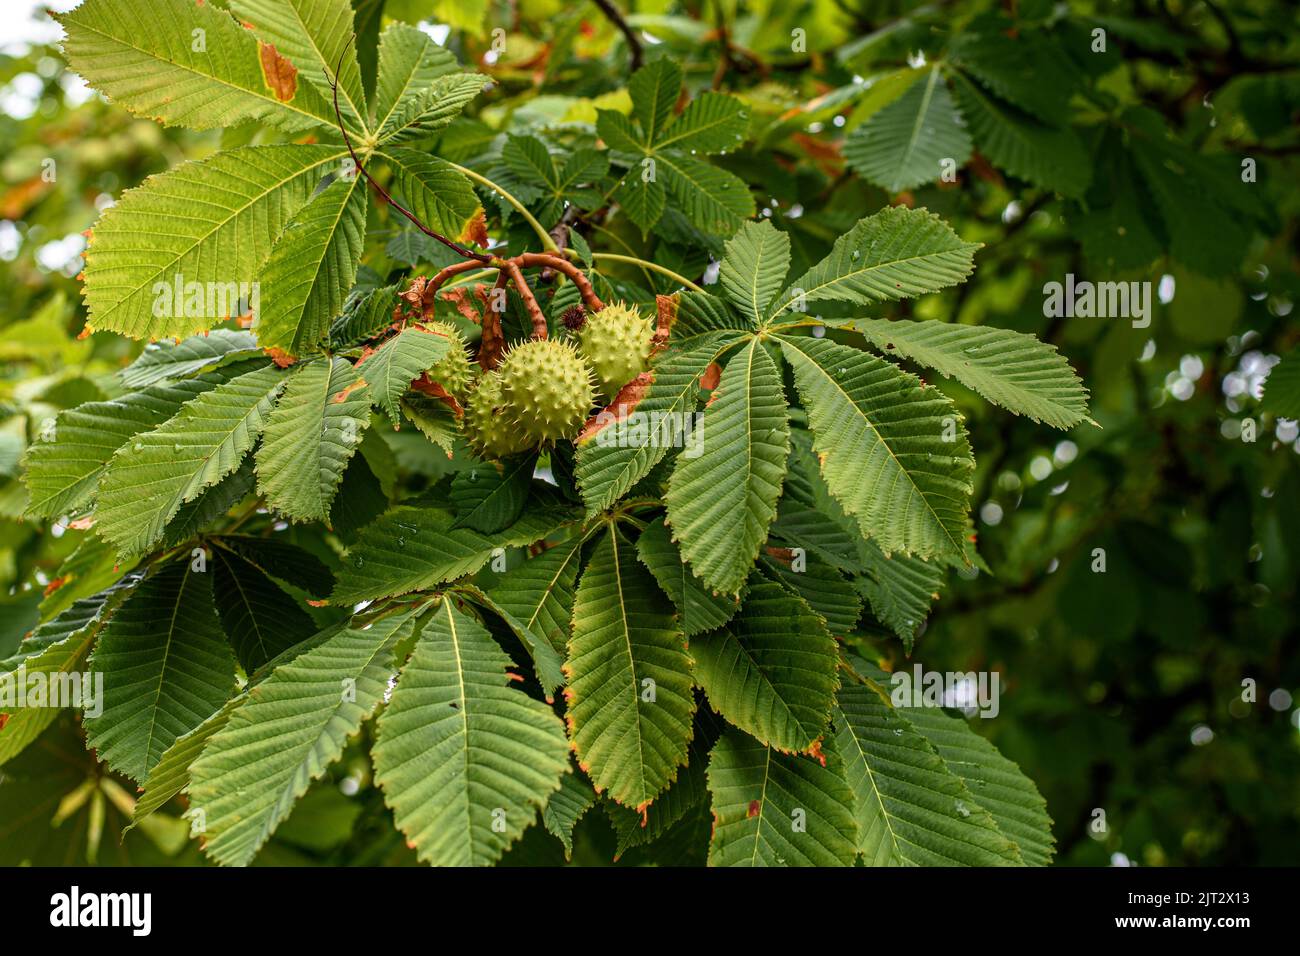 The genus Aesculus, with species called buckeye and horse chestnut, comprises 13–19 species of flowering plants in the family Sapindaceae. They are tr Stock Photo